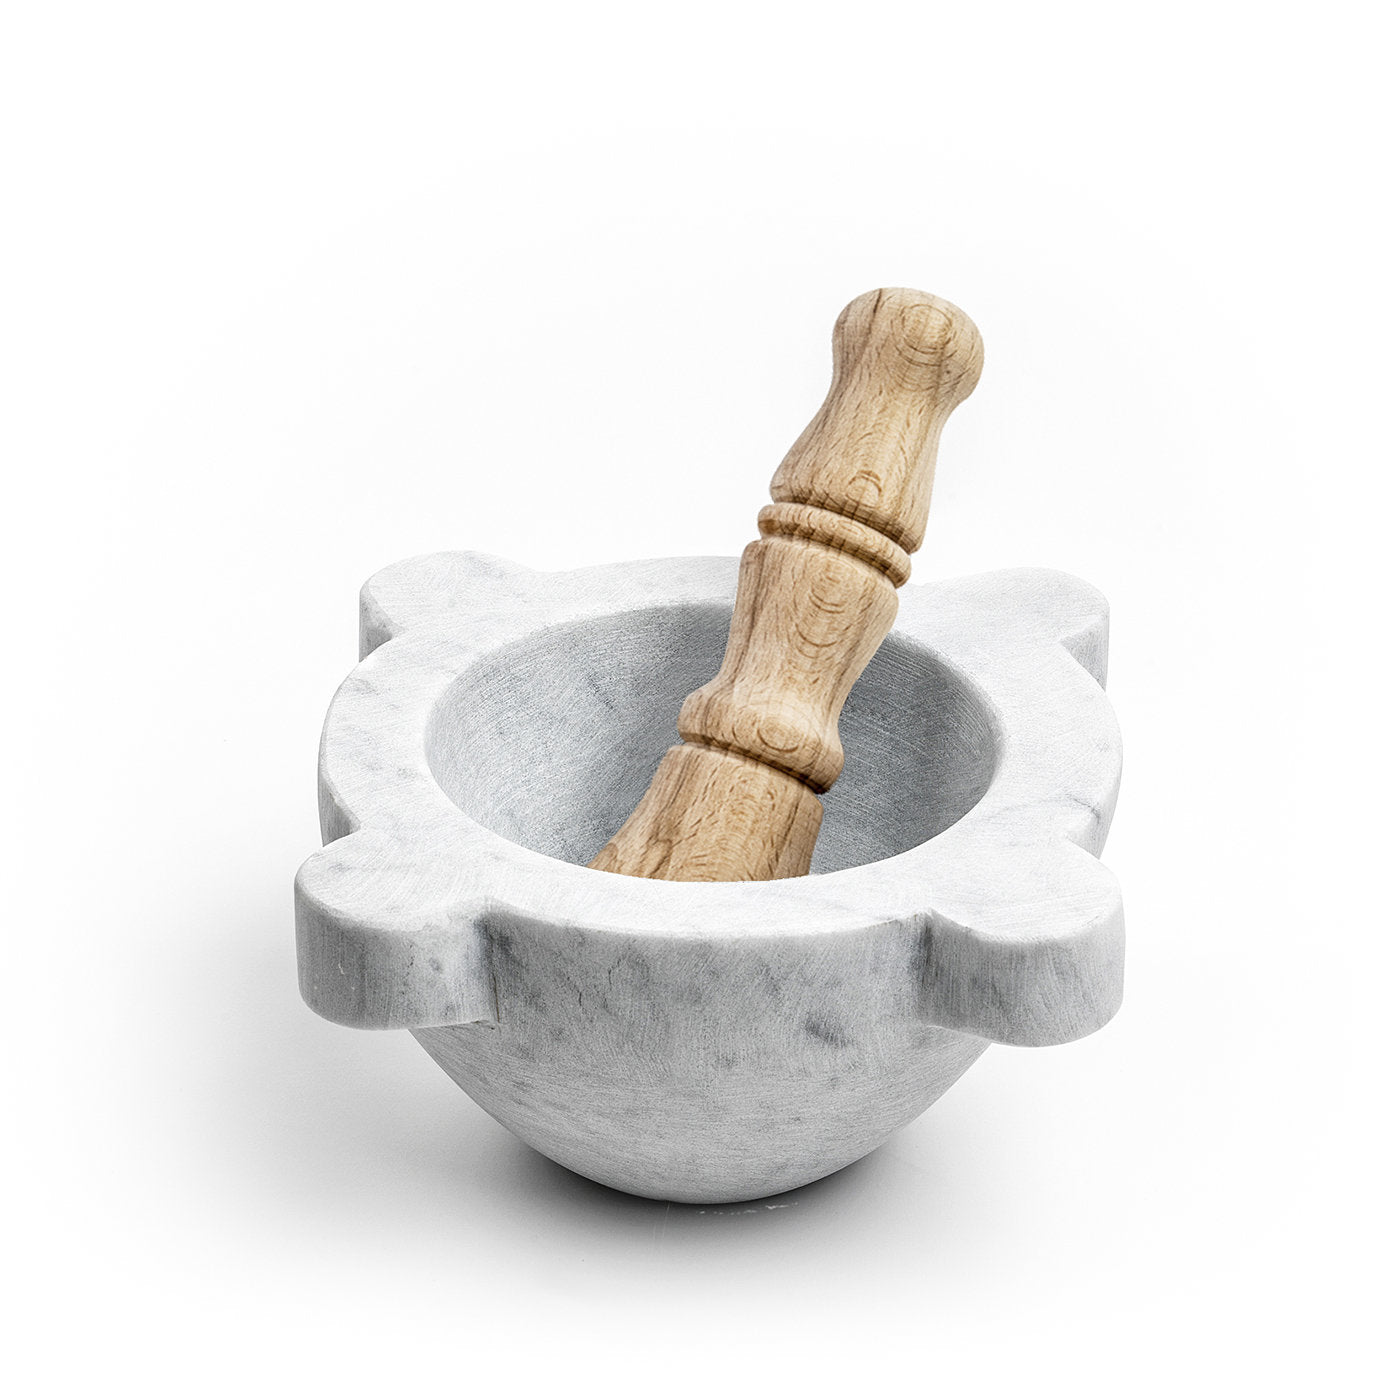 Marble Mortar with Wooden Pestle - Alternative view 1